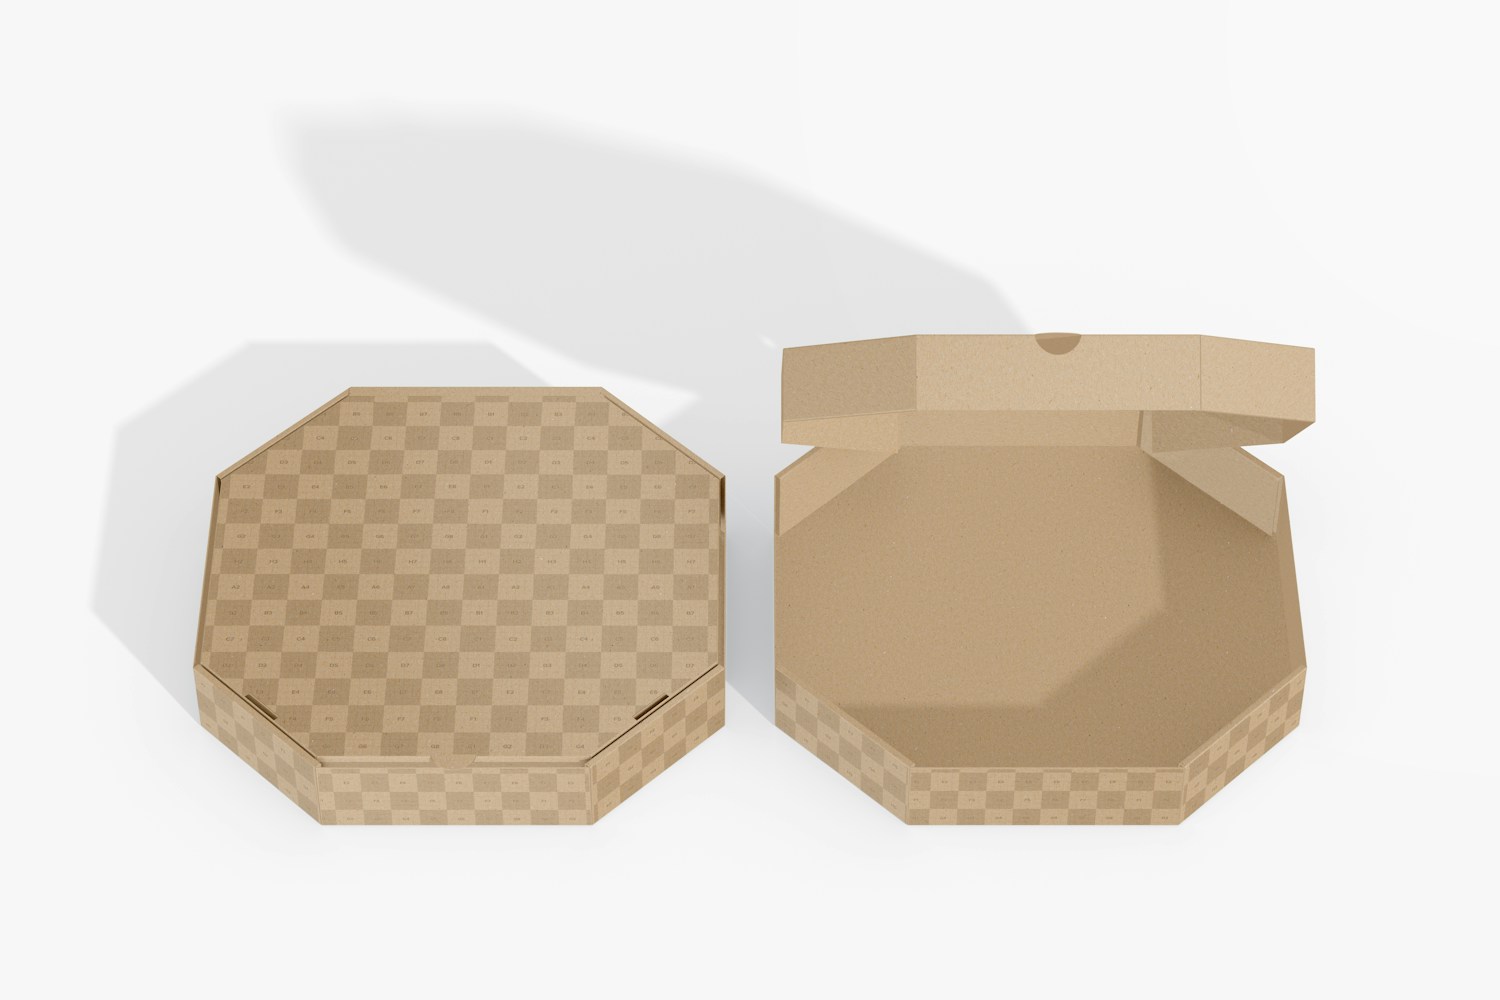 Octagonal Mailing Boxes Mockup, Opened and Closed